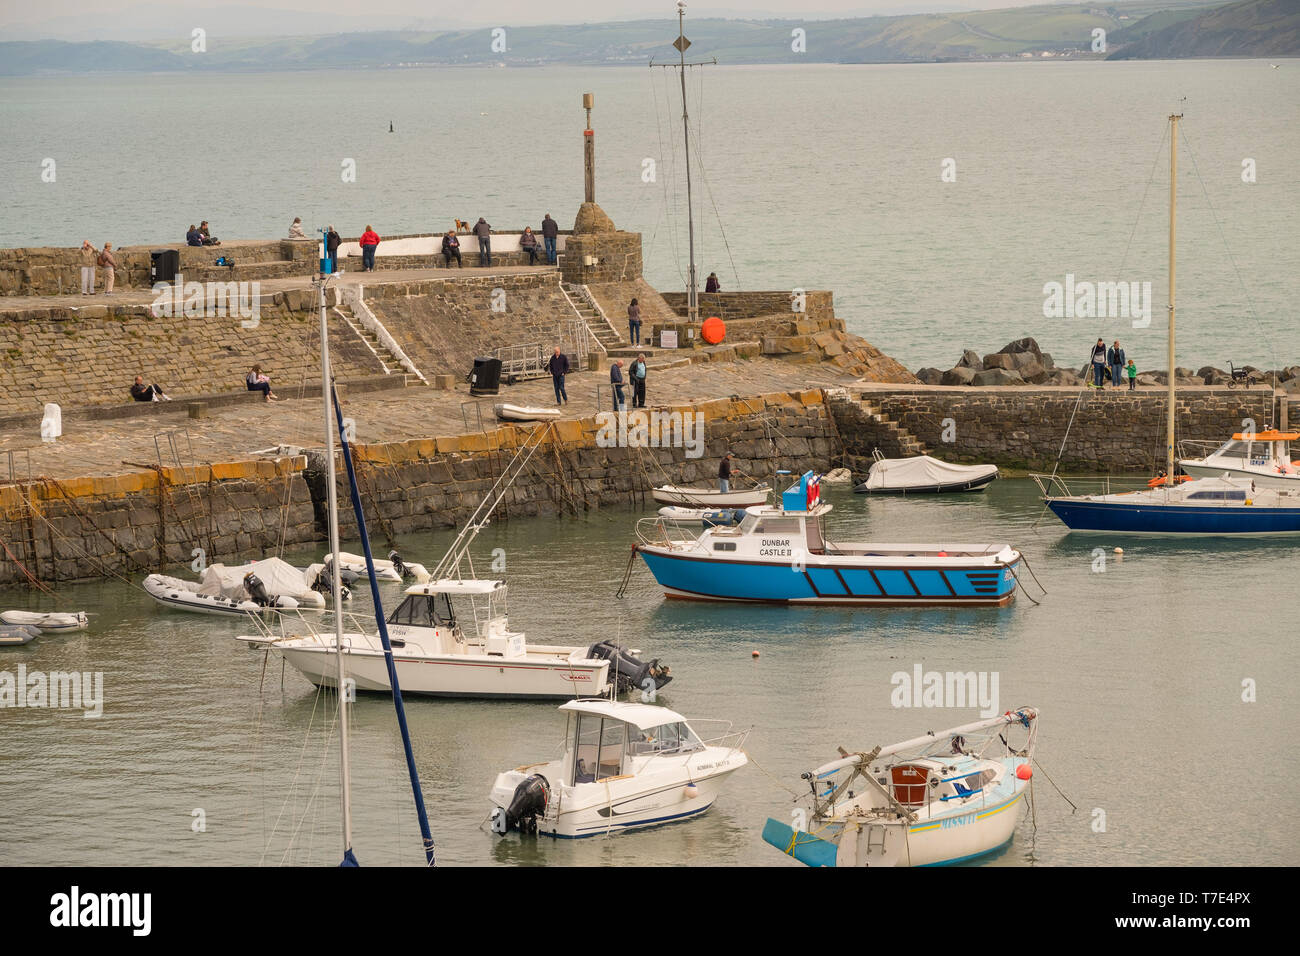 New Quay, Wales UK, Tuesday 07 May 2019 UK Weather: People enjoying the  warm May sunshine at the seaside in the small coastal village of New Quay, on the  shores of Cardigan Bay,   west Wales. Photo credit : Keith Morris /Alamy Live News Stock Photo